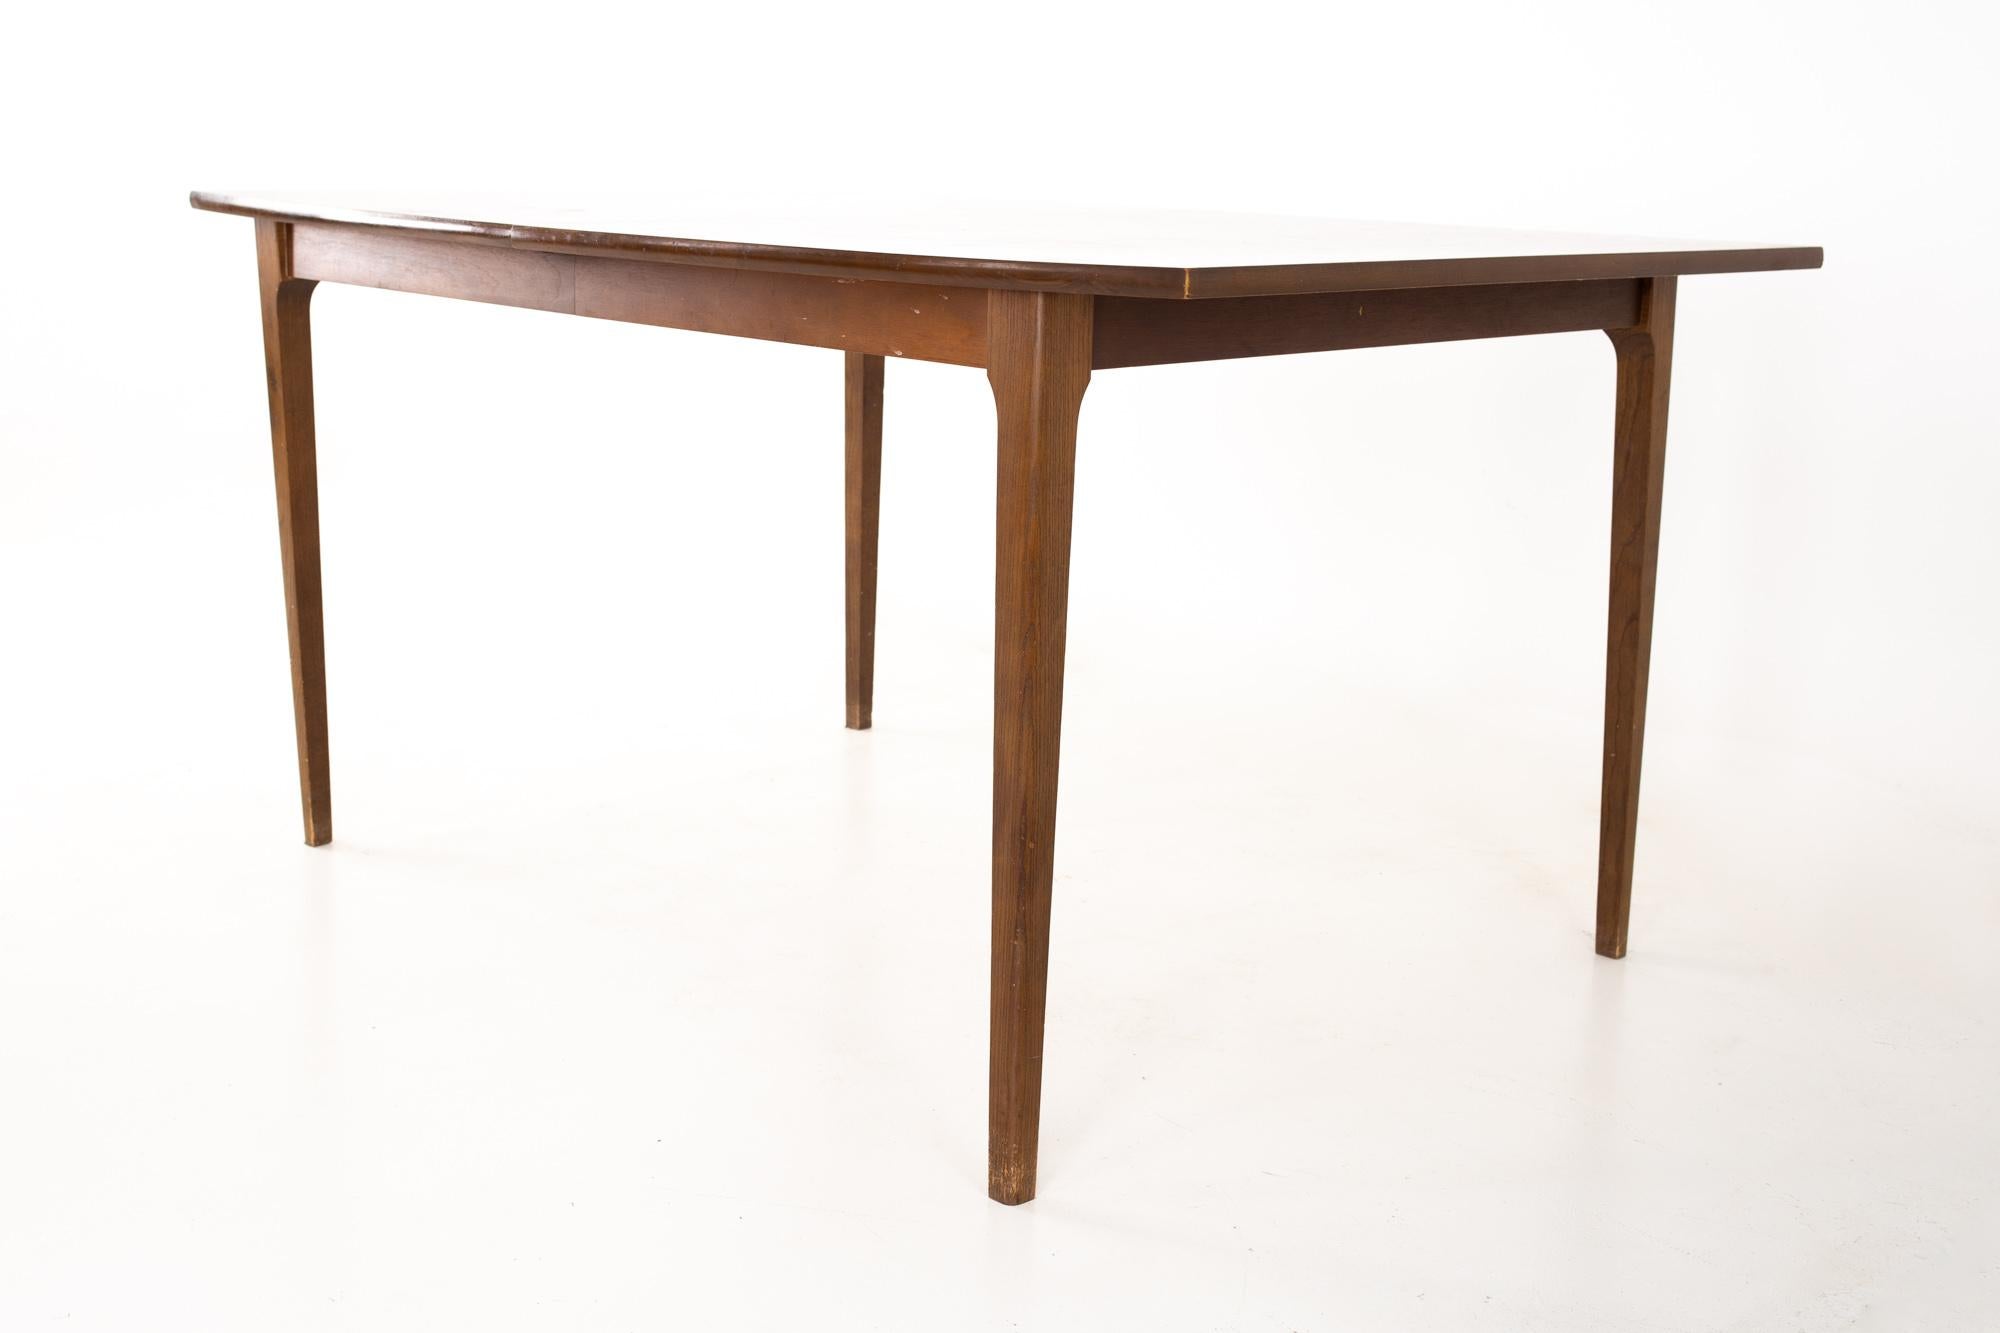 Brasilia style mid century walnut surfboard dining table with 2 leaves
Table measures: 59 wide x 40 deep x 29.5 high, with a chair clearance of 26 inches, Each leaf measures 12 inches wide 

All pieces of furniture can be had in what we call